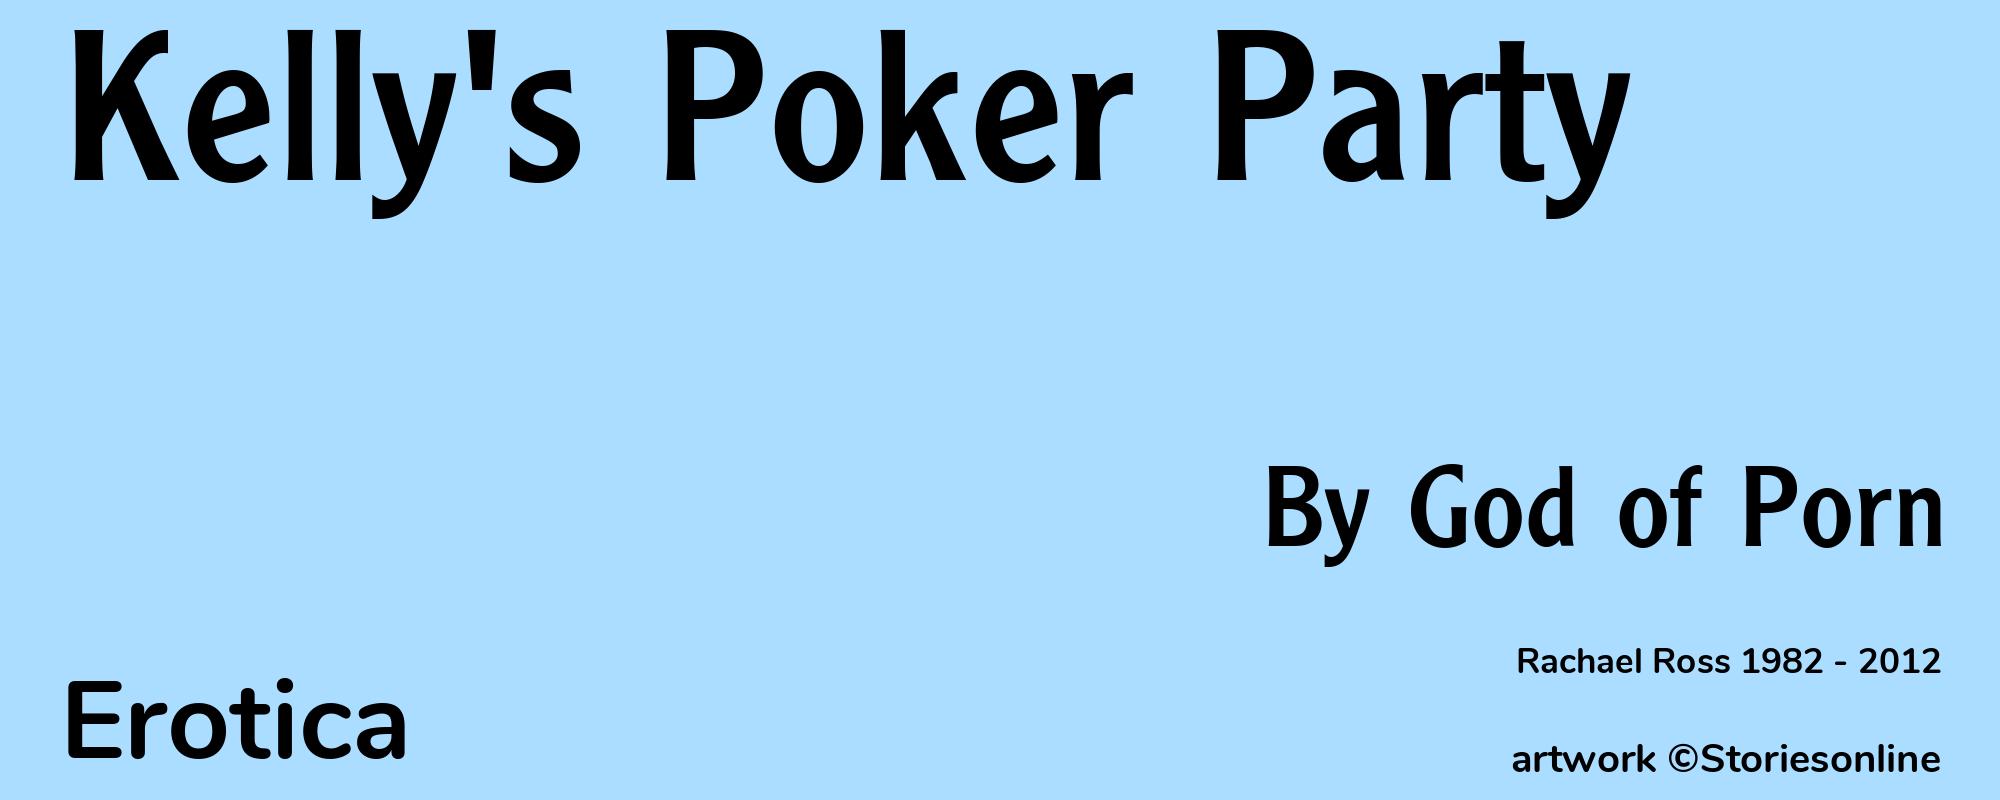 Kelly's Poker Party - Cover